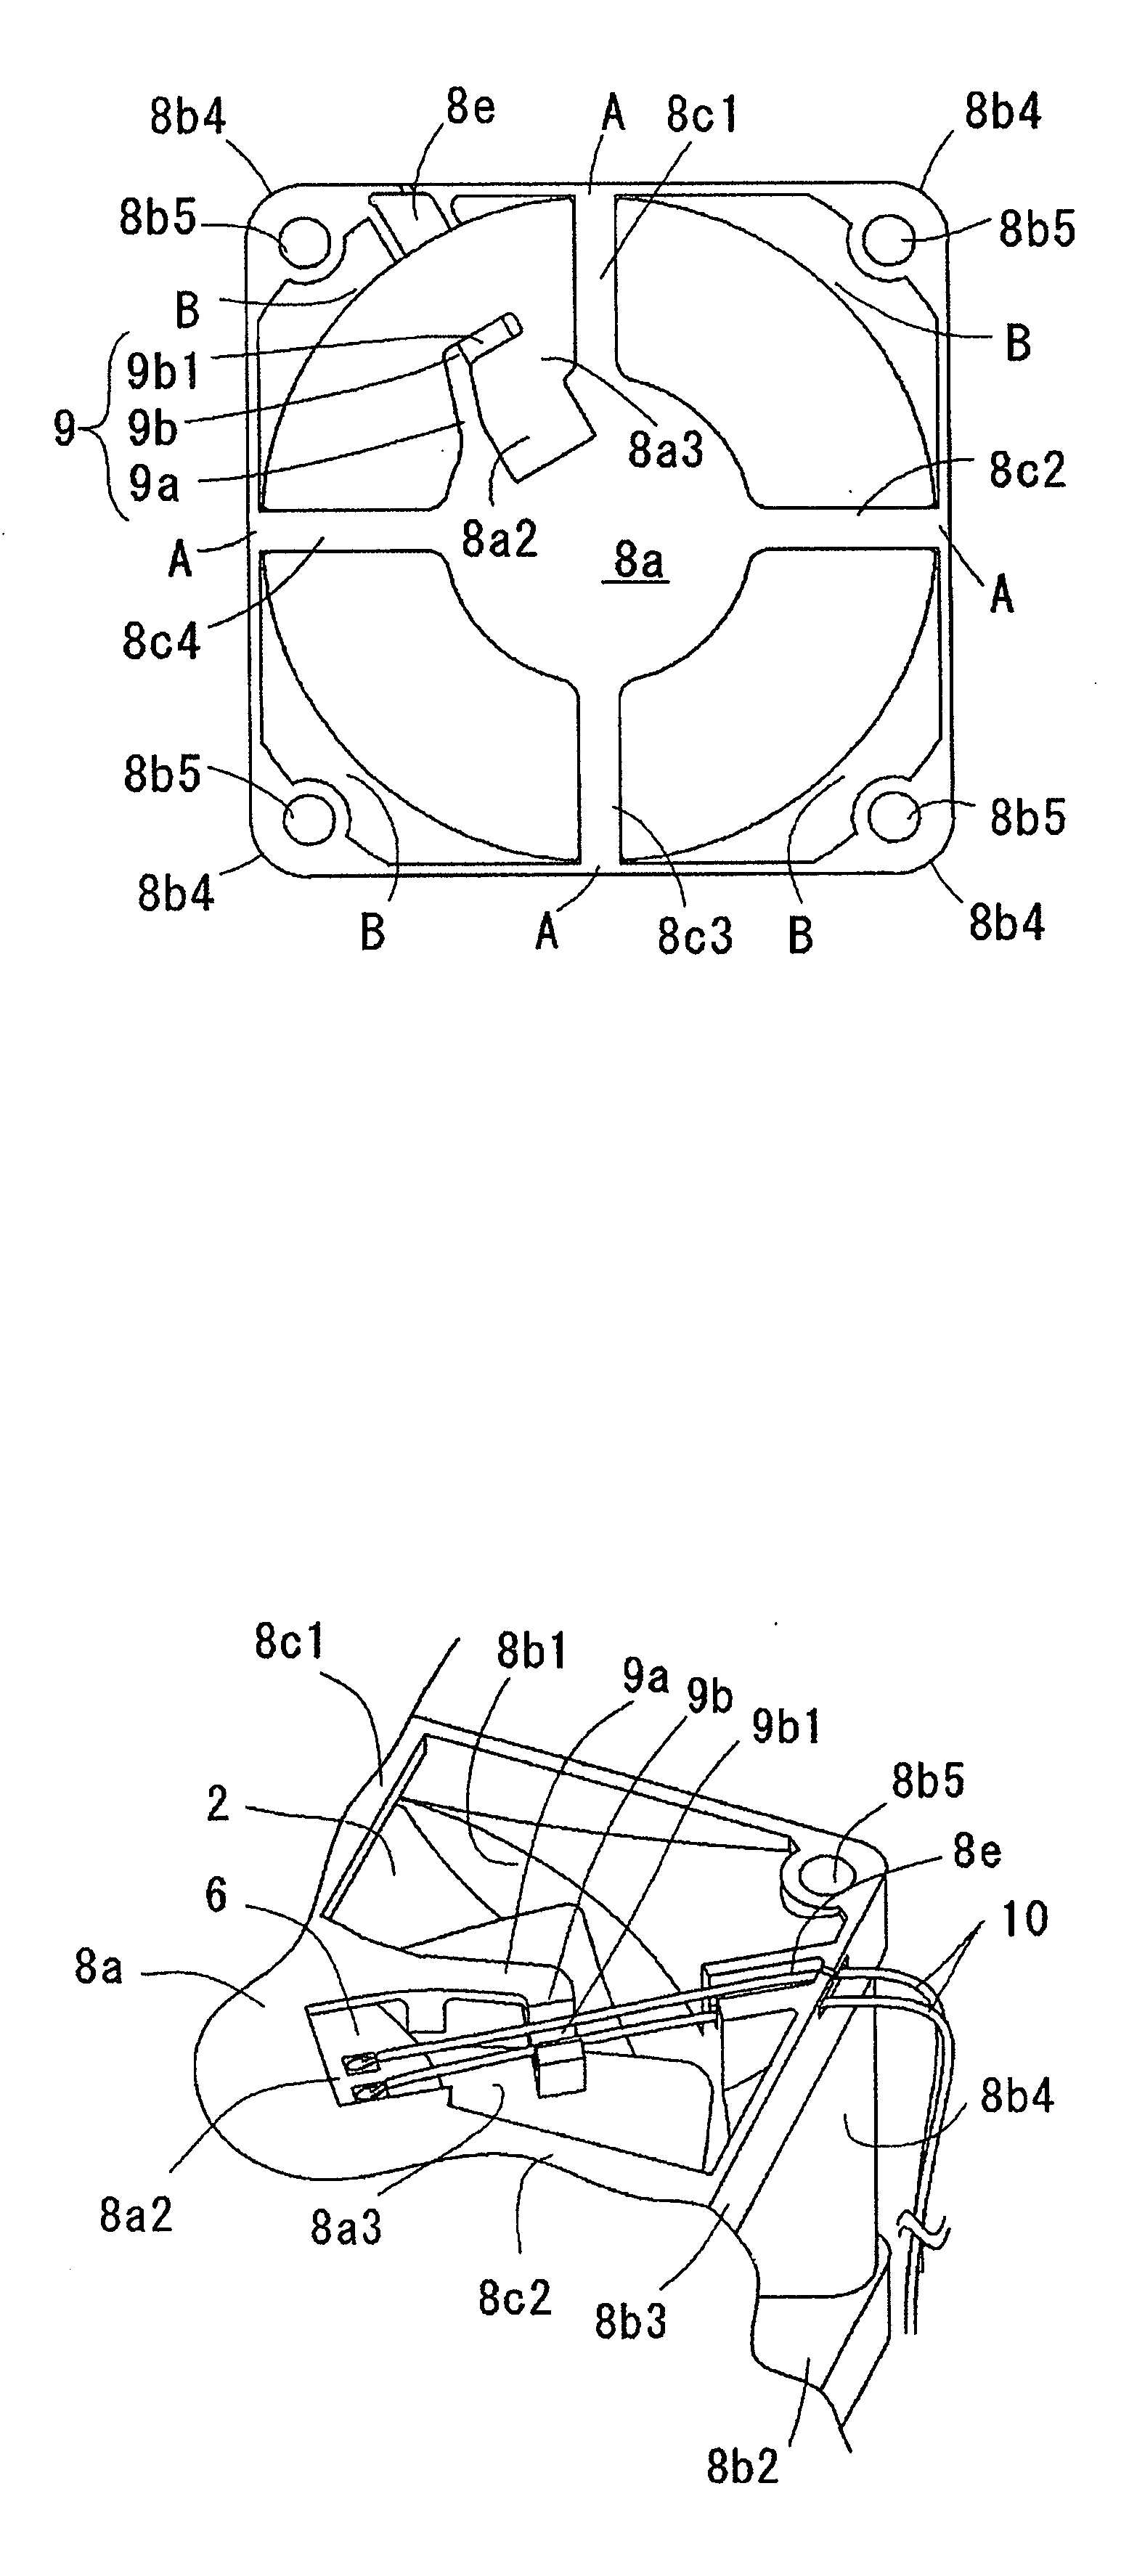 Structure of fan devices for leading out wires